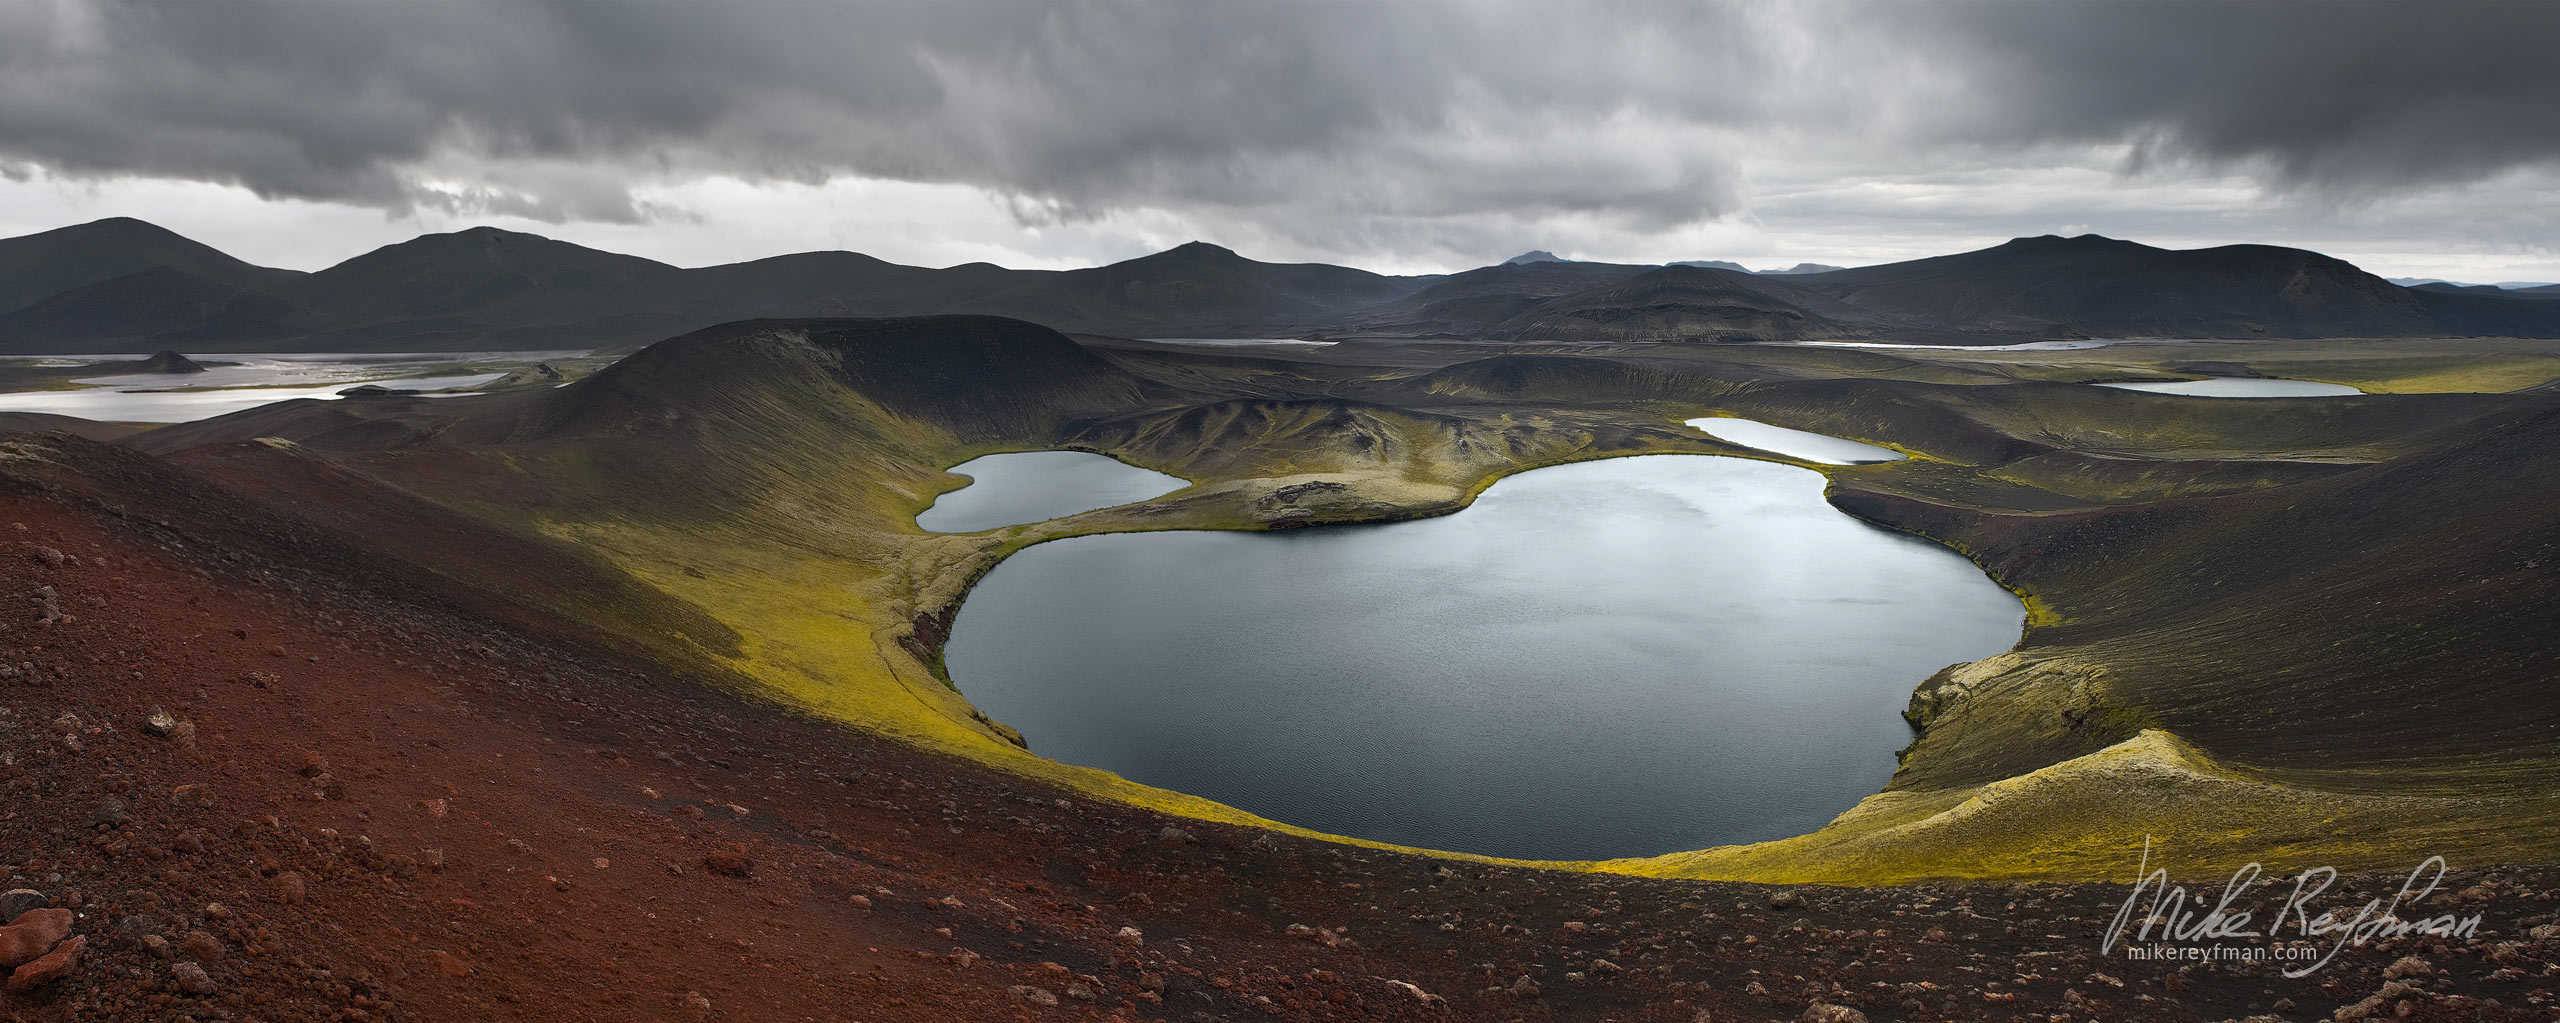 Crater lakes in the Veidivotn area. Central Highlands, Iceland. 067-IC-GP _MR28740-43_Pano-1x2.55 - Rhyolite Mountains, Crater Lakes, Geothermal Areas, Lava Fields and Glacial Rivers. Iceland.  - Mike Reyfman Photography